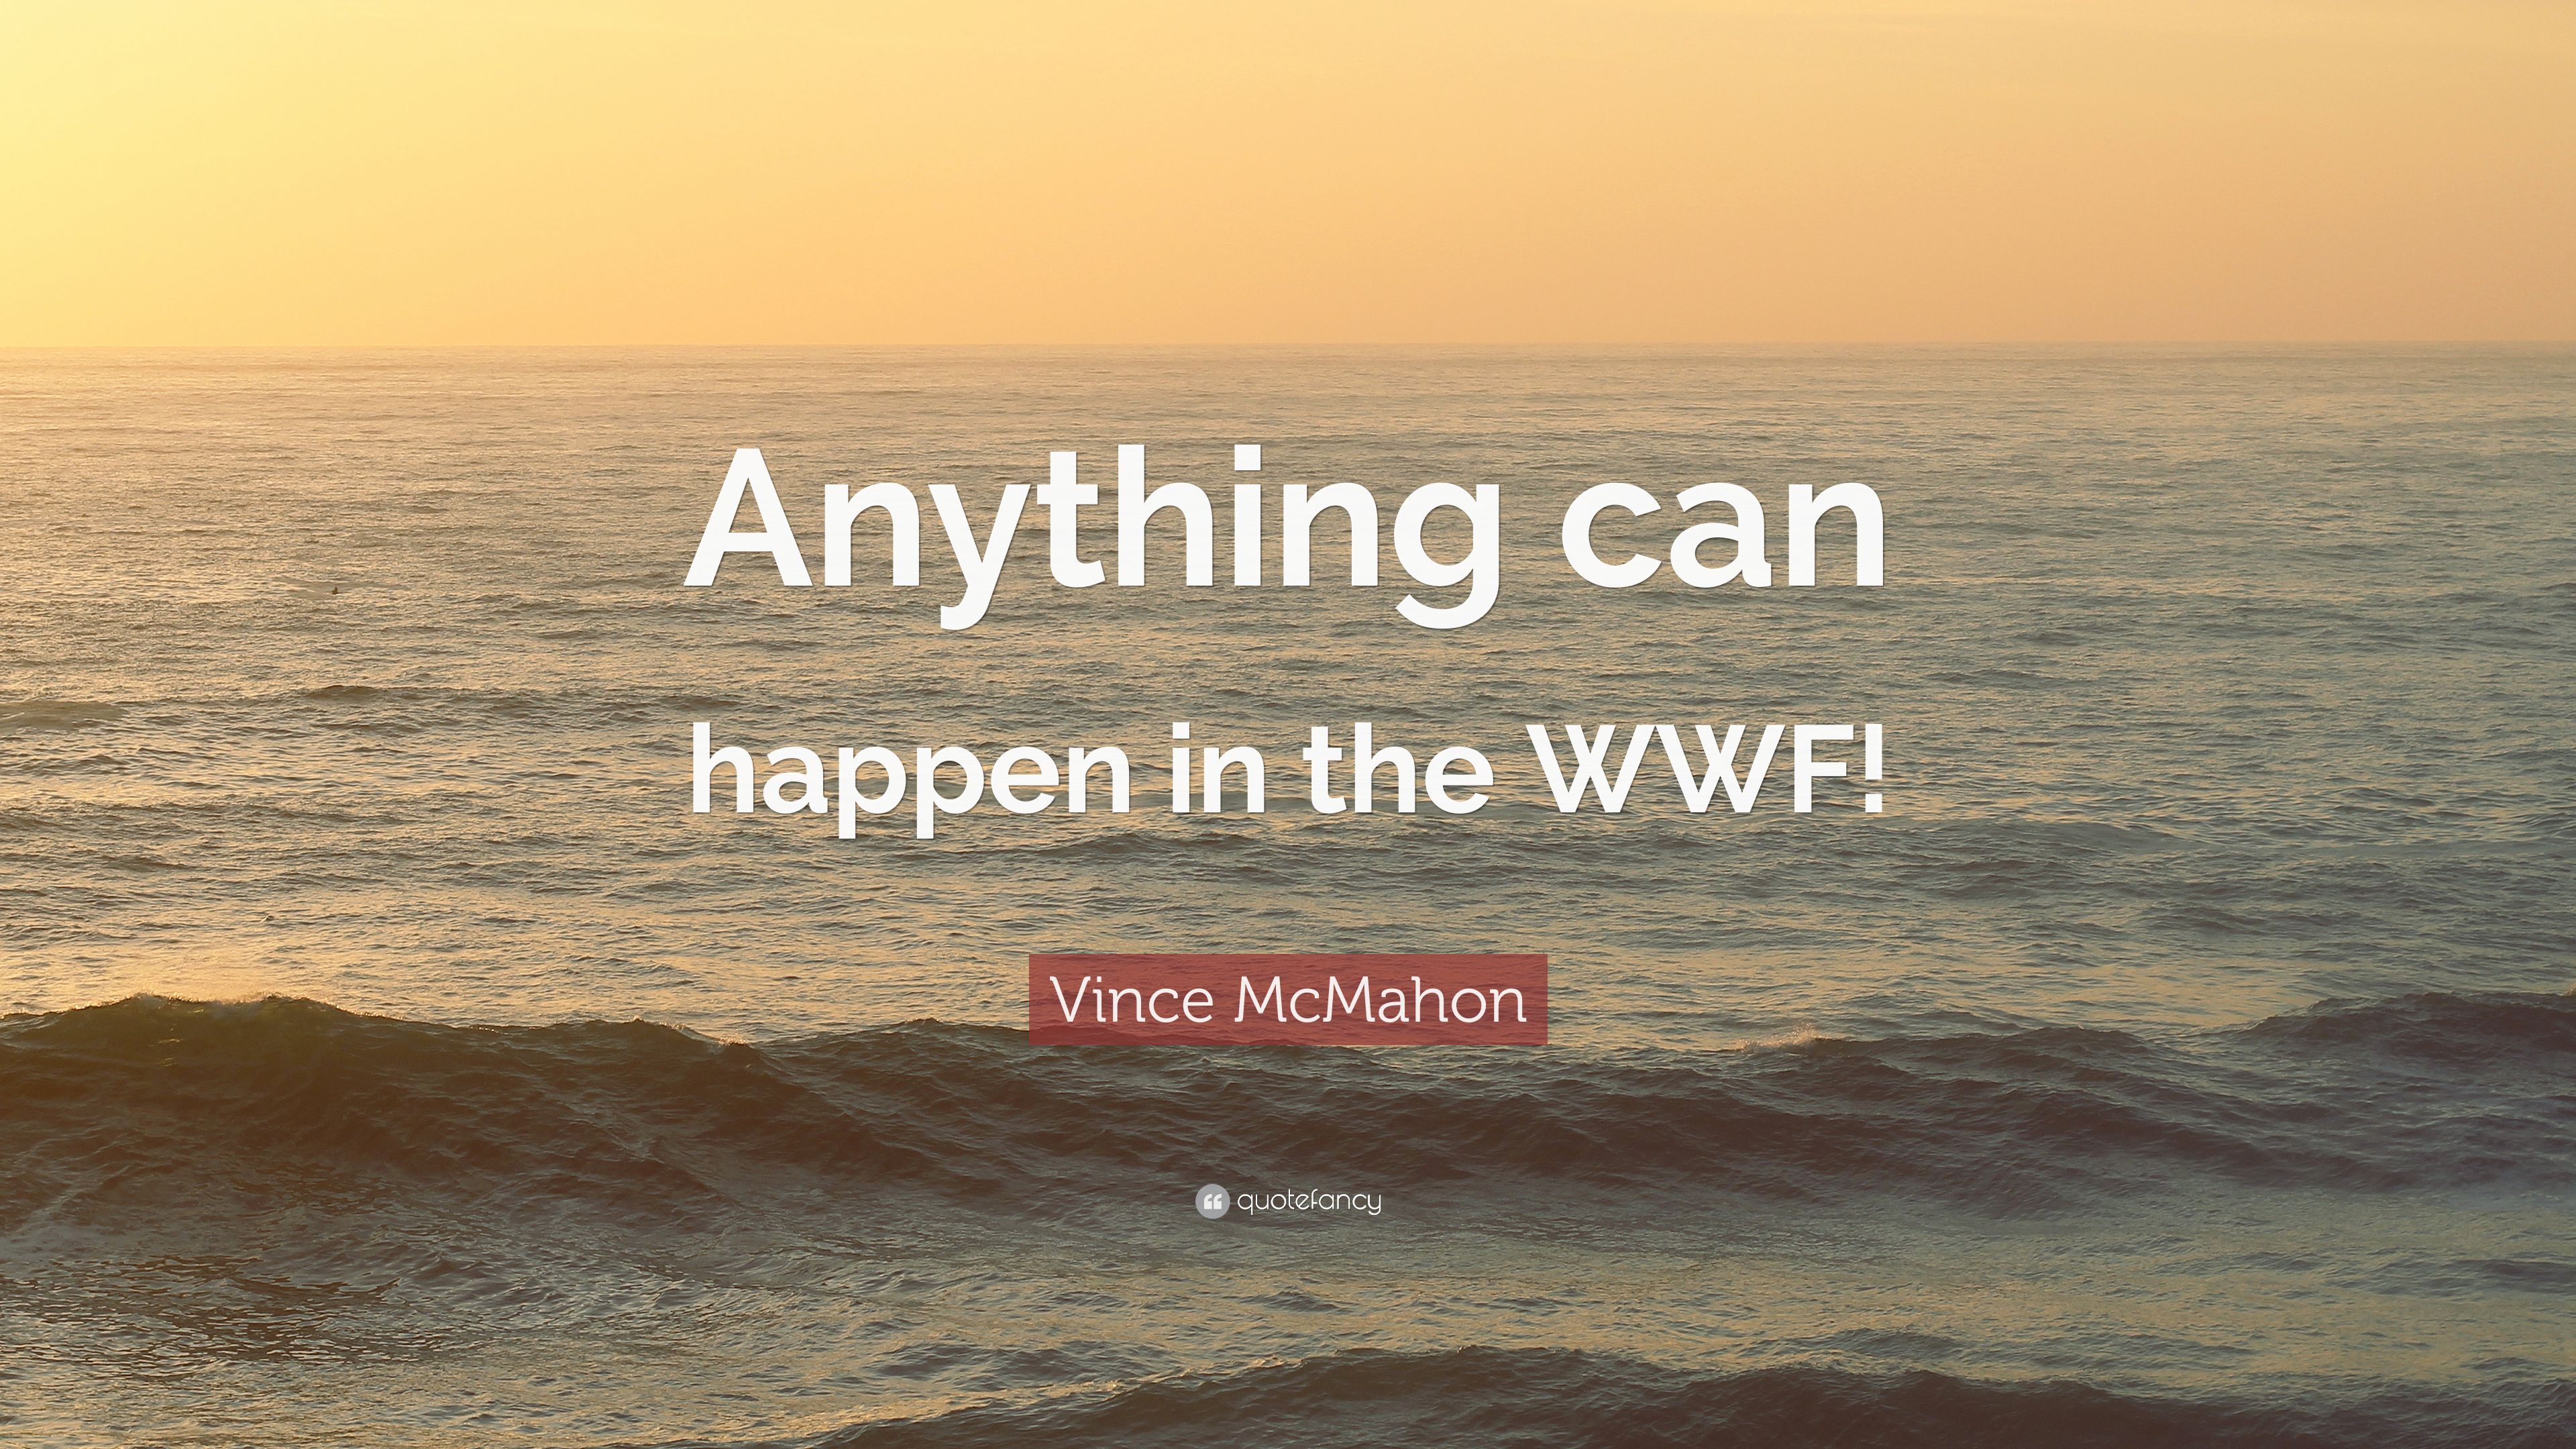 Vince McMahon Quote: “Anything can happen in the WWF!” 7